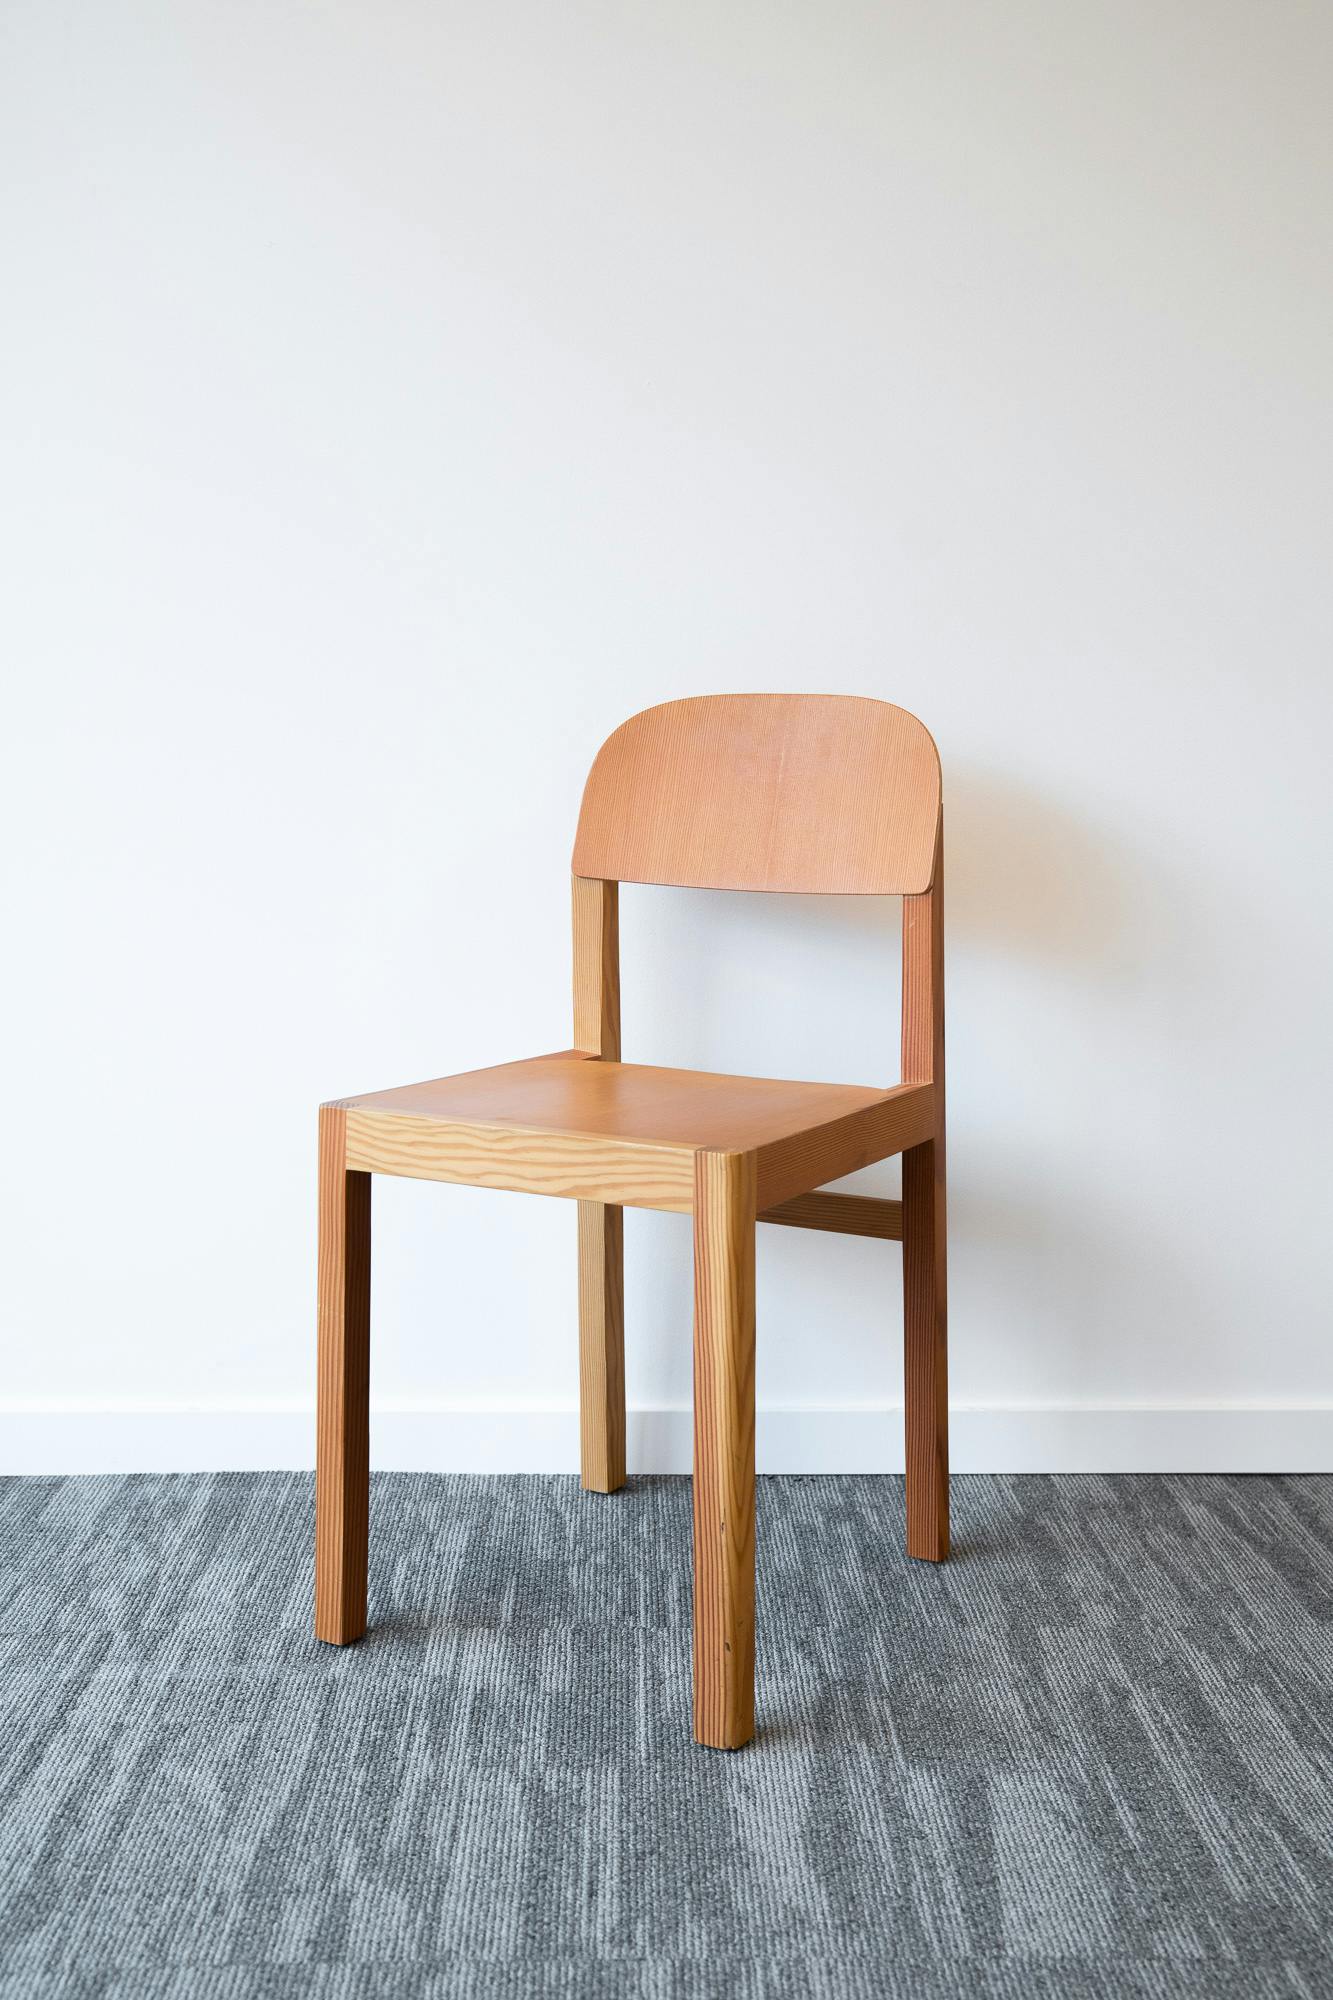 Wooden chair - Second hand quality "Chairs" - Relieve Furniture - 3